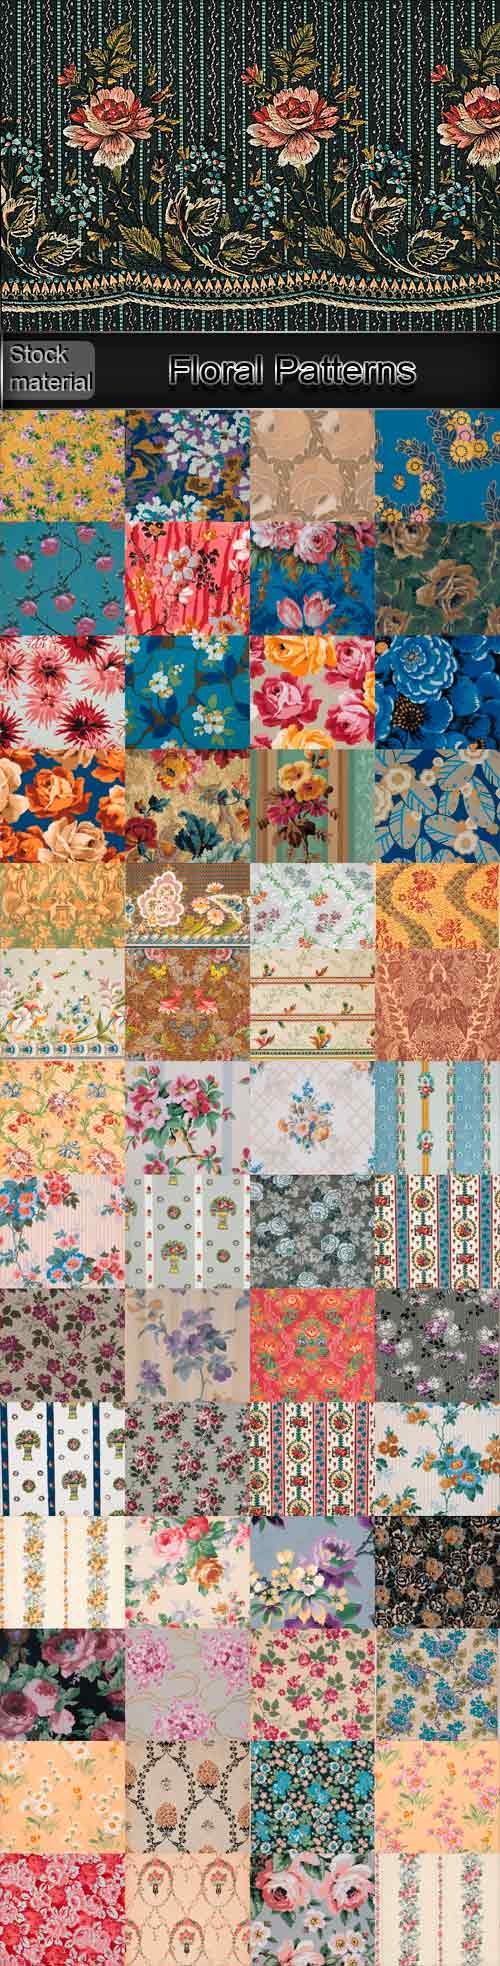 Floral Patterns photo stock